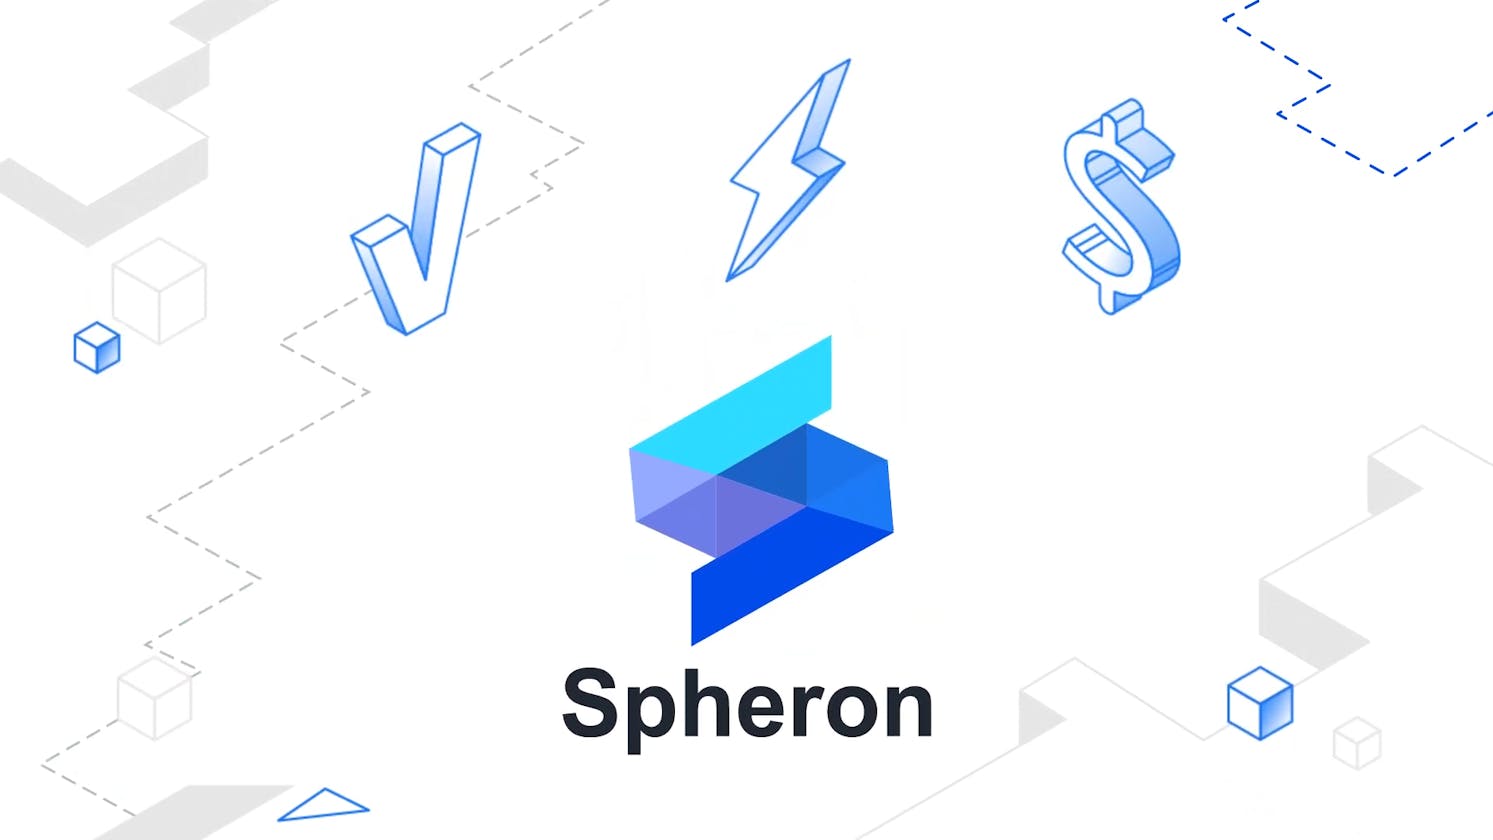 What is Spheron, Why Spheron and What does it do?